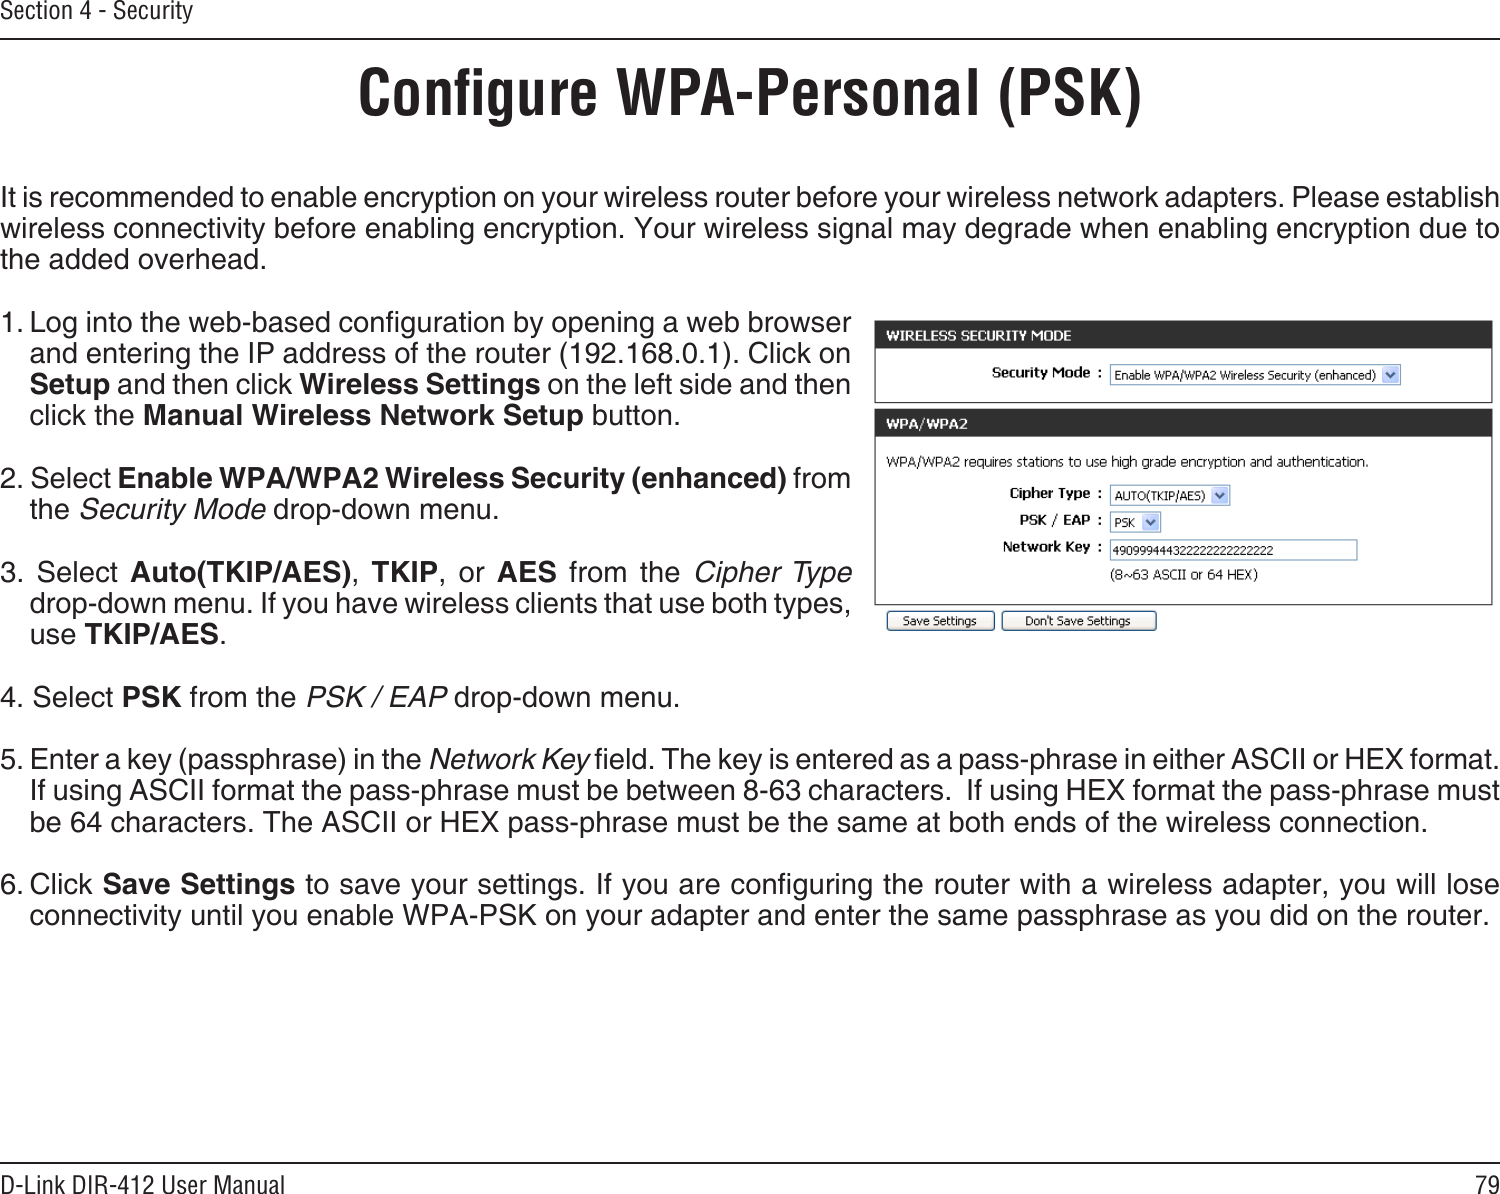 79D-Link DIR-412 User ManualSection 4 - SecurityConﬁgure WPA-Personal (PSK)It is recommended to enable encryption on your wireless router before your wireless network adapters. Please establish wireless connectivity before enabling encryption. Your wireless signal may degrade when enabling encryption due to the added overhead.1. Log into the web-based conguration by opening a web browser and entering the IP address of the router (192.168.0.1). Click on Setup and then click Wireless Settings on the left side and then click the Manual Wireless Network Setup button.2. Select Enable WPA/WPA2 Wireless Security (enhanced) from the Security Mode drop-down menu.3.  Select  Auto(TKIP/AES),  TKIP,  or  AES  from  the  Cipher Type drop-down menu. If you have wireless clients that use both types, use TKIP/AES.4. Select PSK from the PSK / EAP drop-down menu.5. Enter a key (passphrase) in the Network Key eld. The key is entered as a pass-phrase in either ASCII or HEX format. If using ASCII format the pass-phrase must be between 8-63 characters.  If using HEX format the pass-phrase must be 64 characters. The ASCII or HEX pass-phrase must be the same at both ends of the wireless connection. 6. Click Save Settings to save your settings. If you are conguring the router with a wireless adapter, you will lose connectivity until you enable WPA-PSK on your adapter and enter the same passphrase as you did on the router.